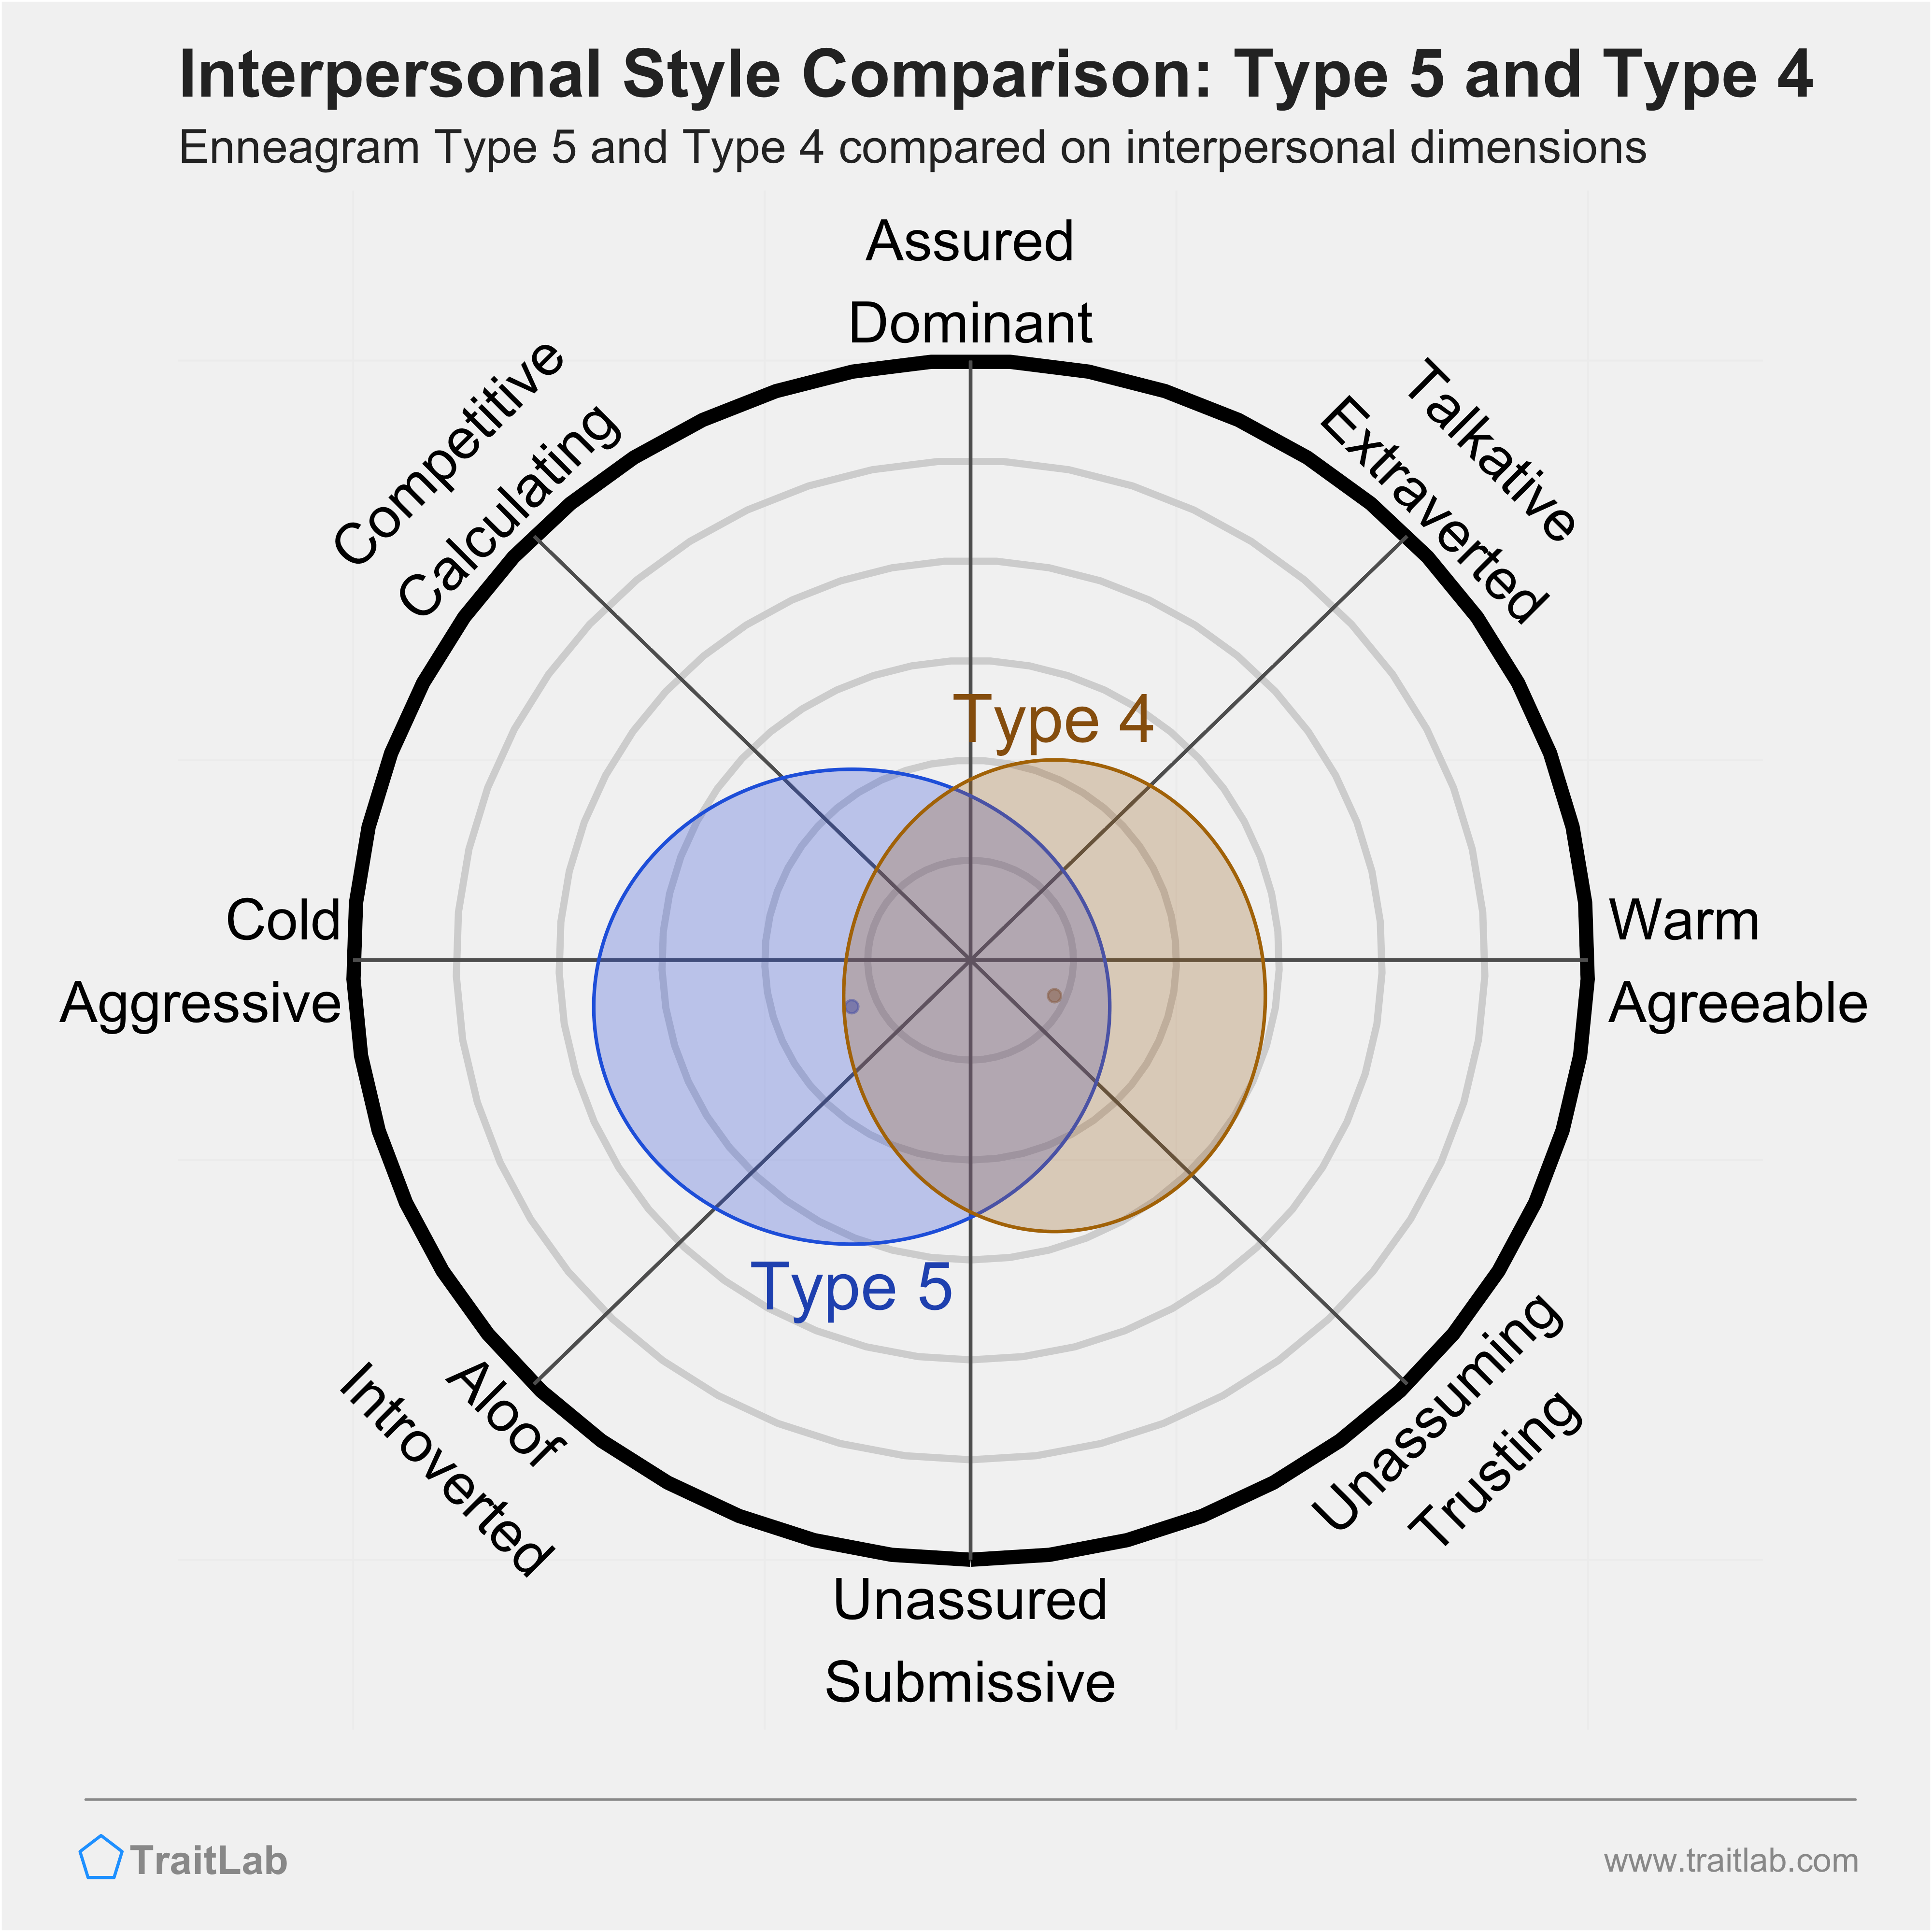 Enneagram Type 5 and Type 4 comparison across interpersonal dimensions